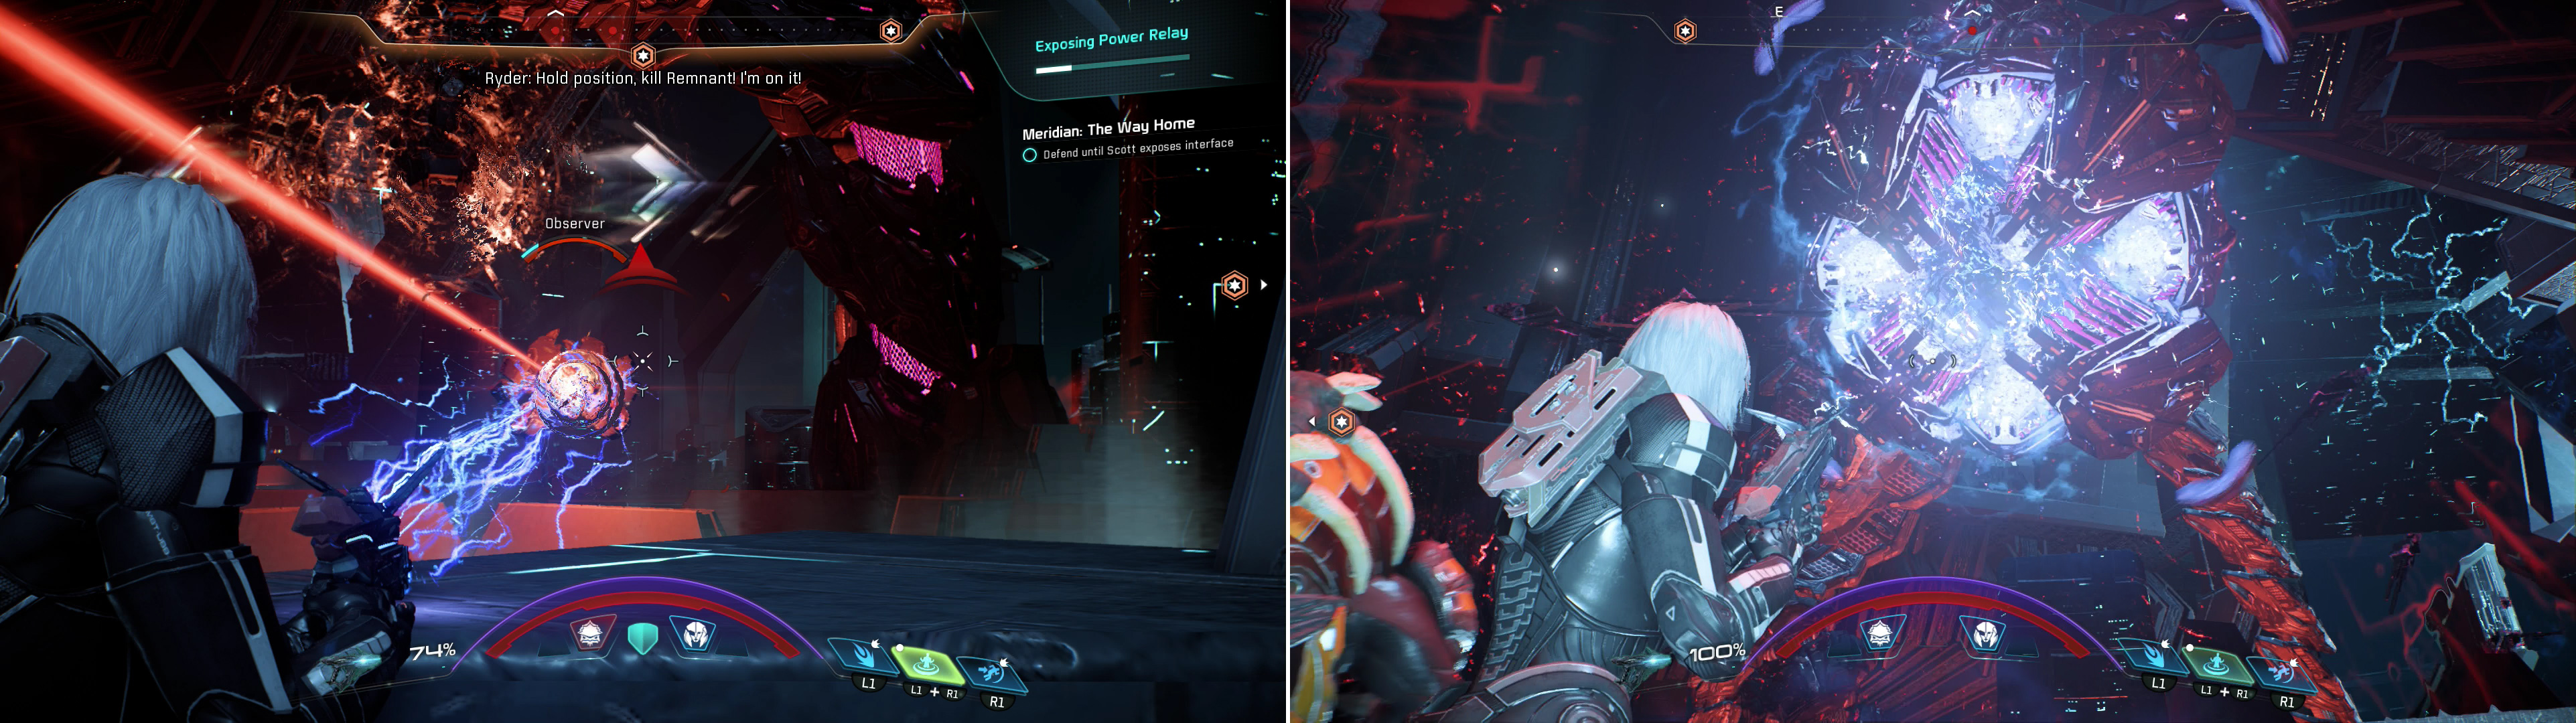 Reach the first Power Relay and fight off the Remnant that attack (left), but be wary of the Archon's charged laser, as it penetrates cover (right).